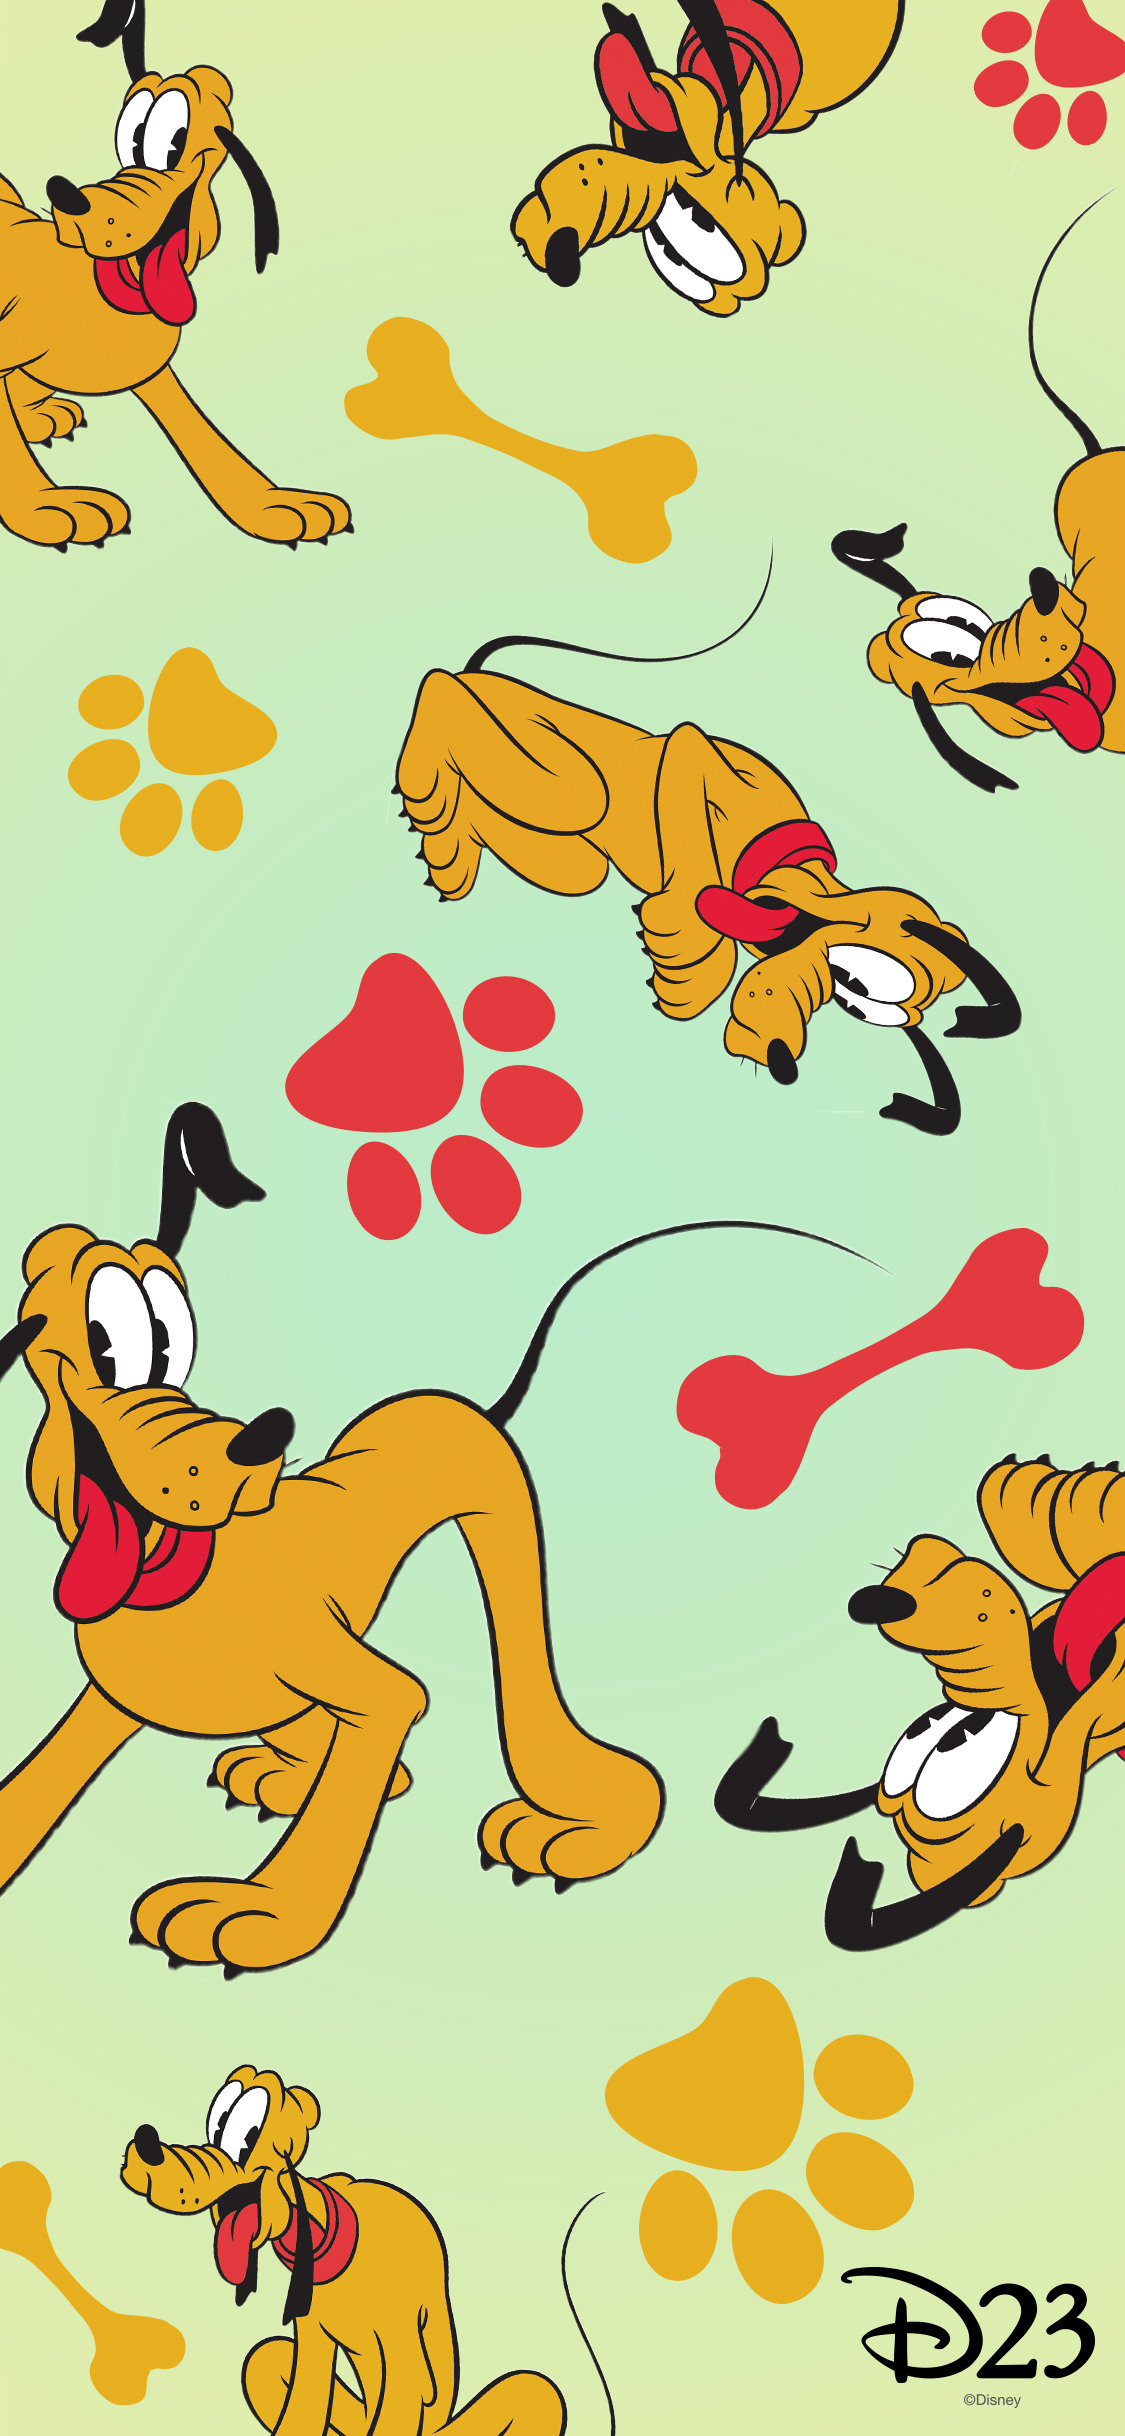 Download These Disney Dog Phone Wallpaper To Give Your Phone A Paw Some Makeover